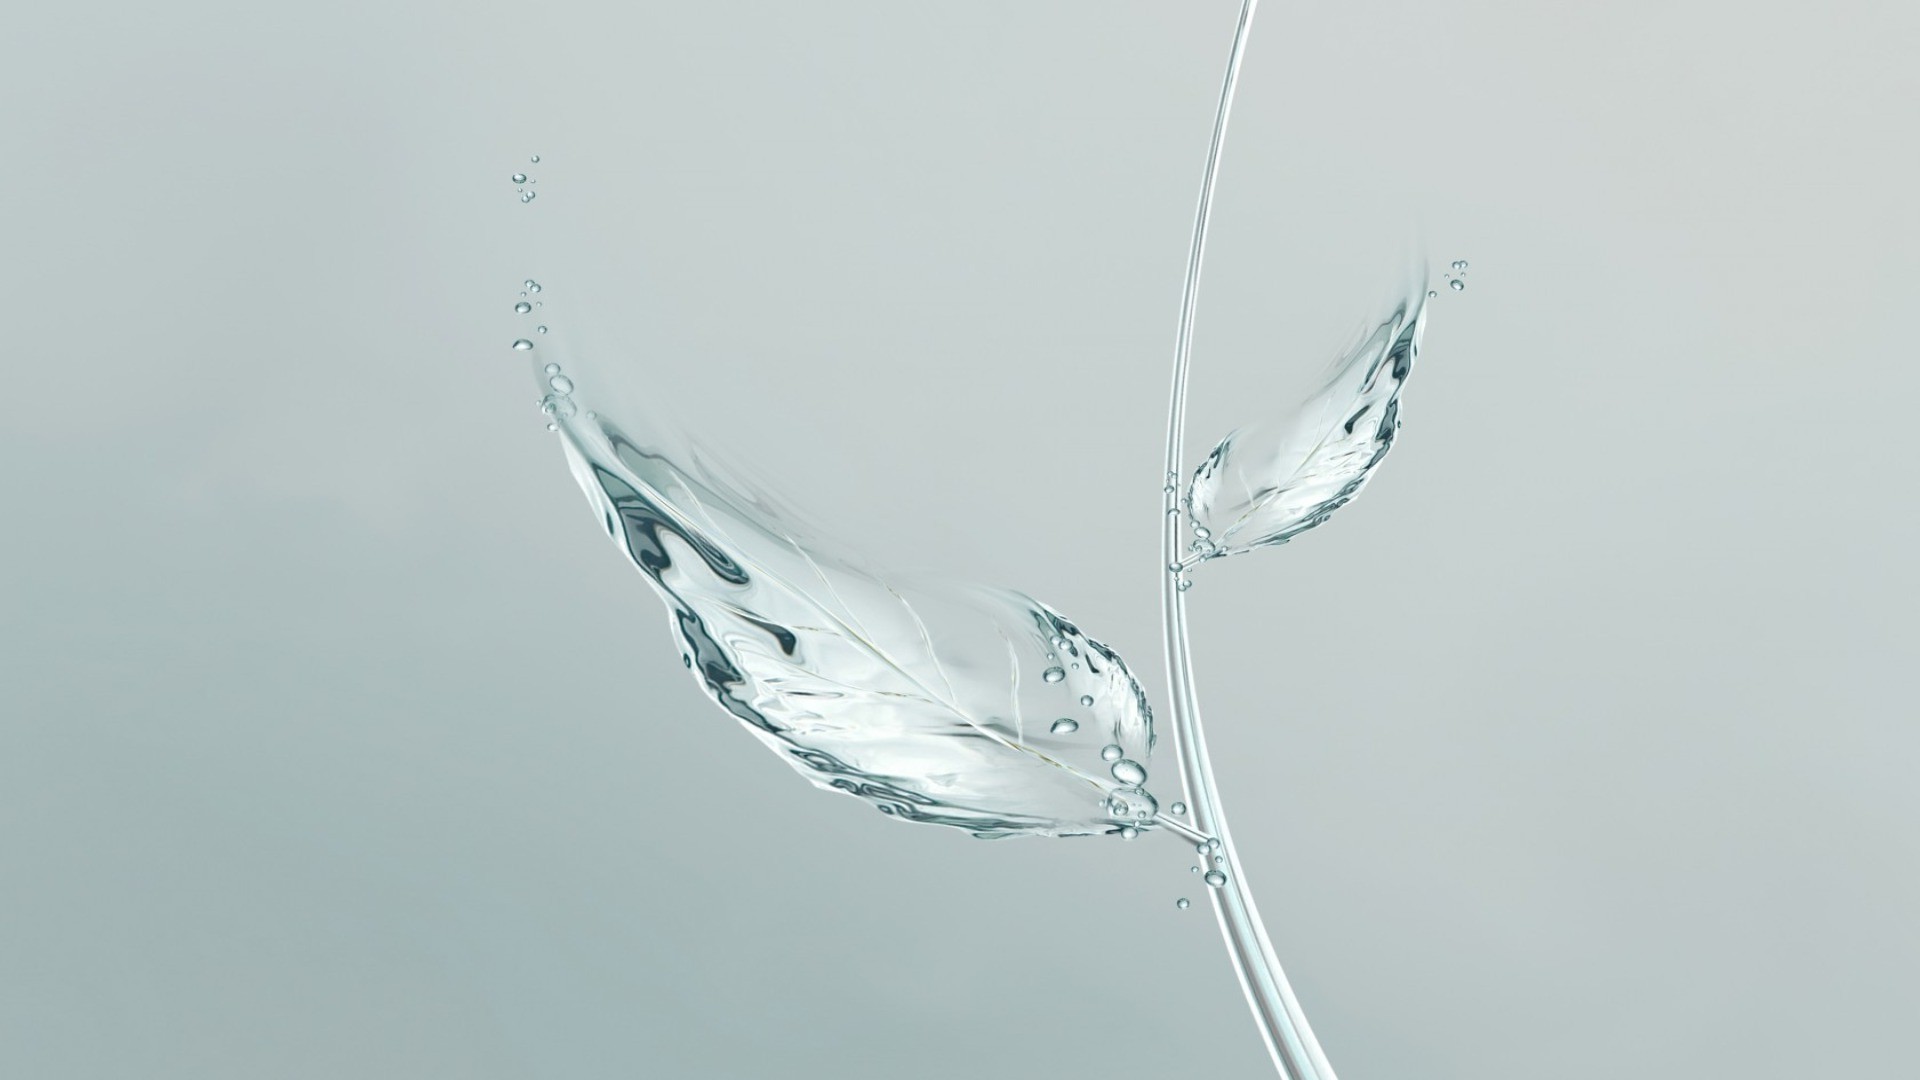 abstract and graphics motion water drop splash purity wave bubble wet clean liquid drink clear droplet nature flow rain